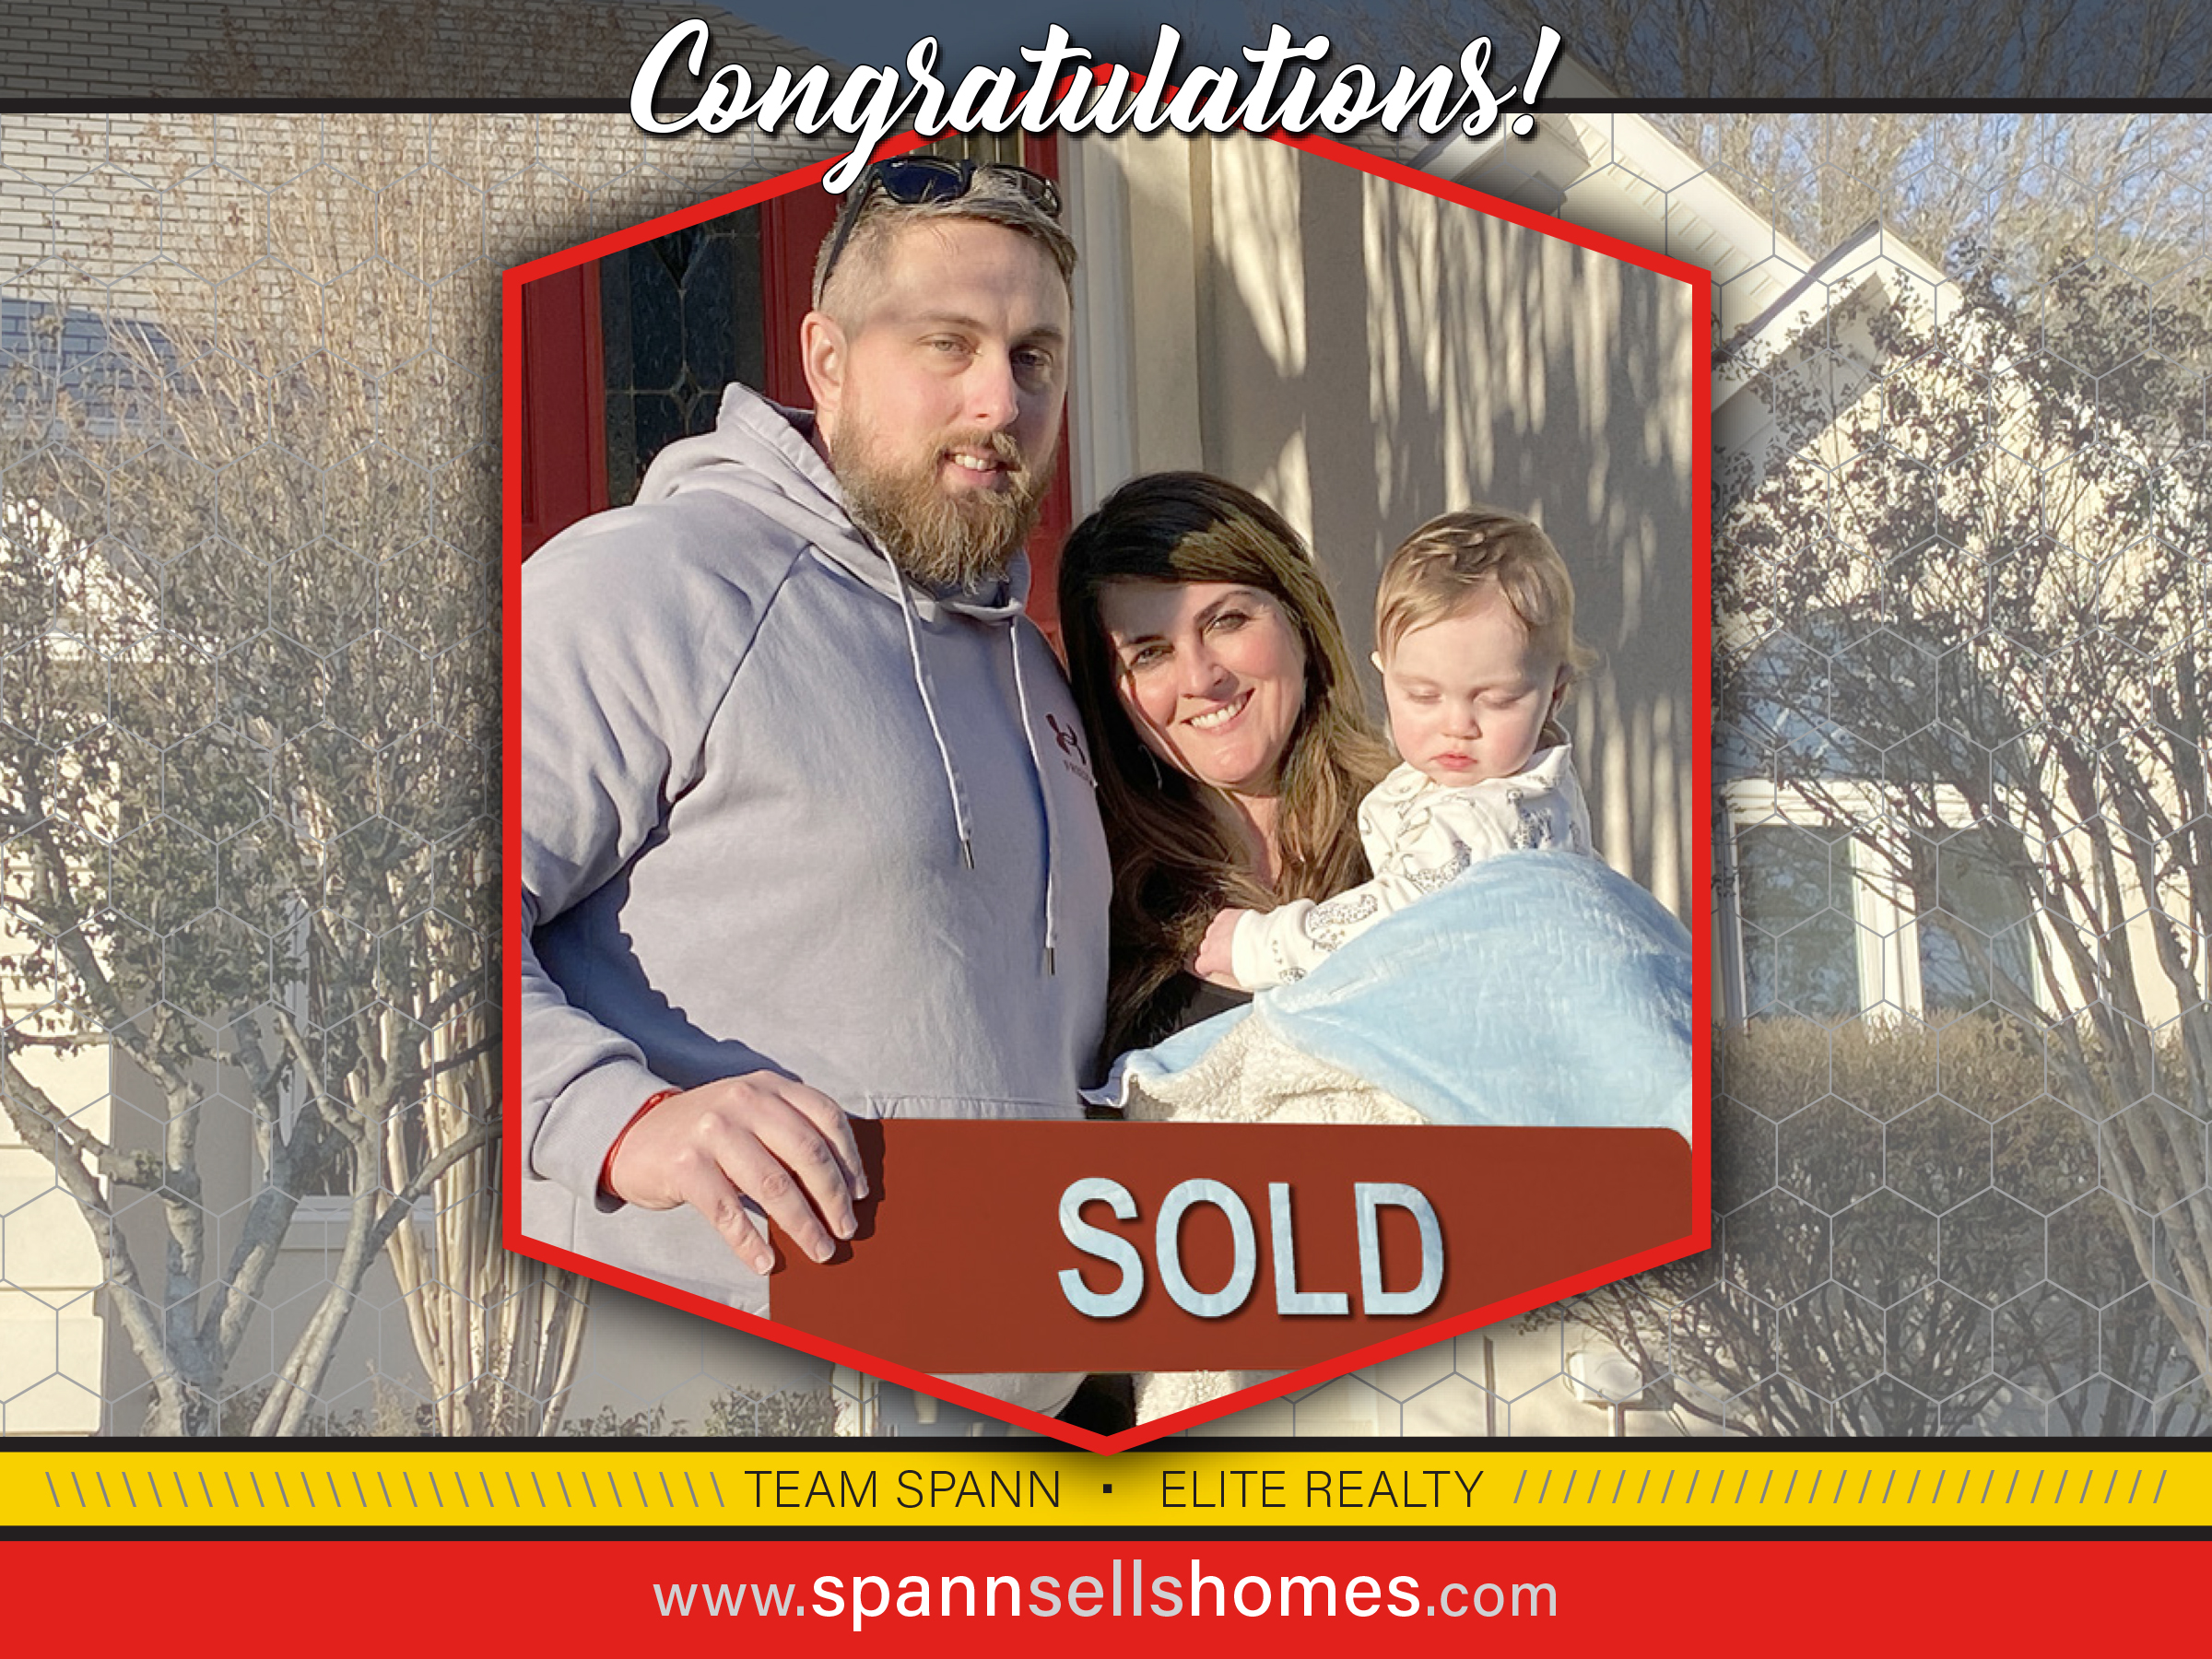 SOLD to new homeowners